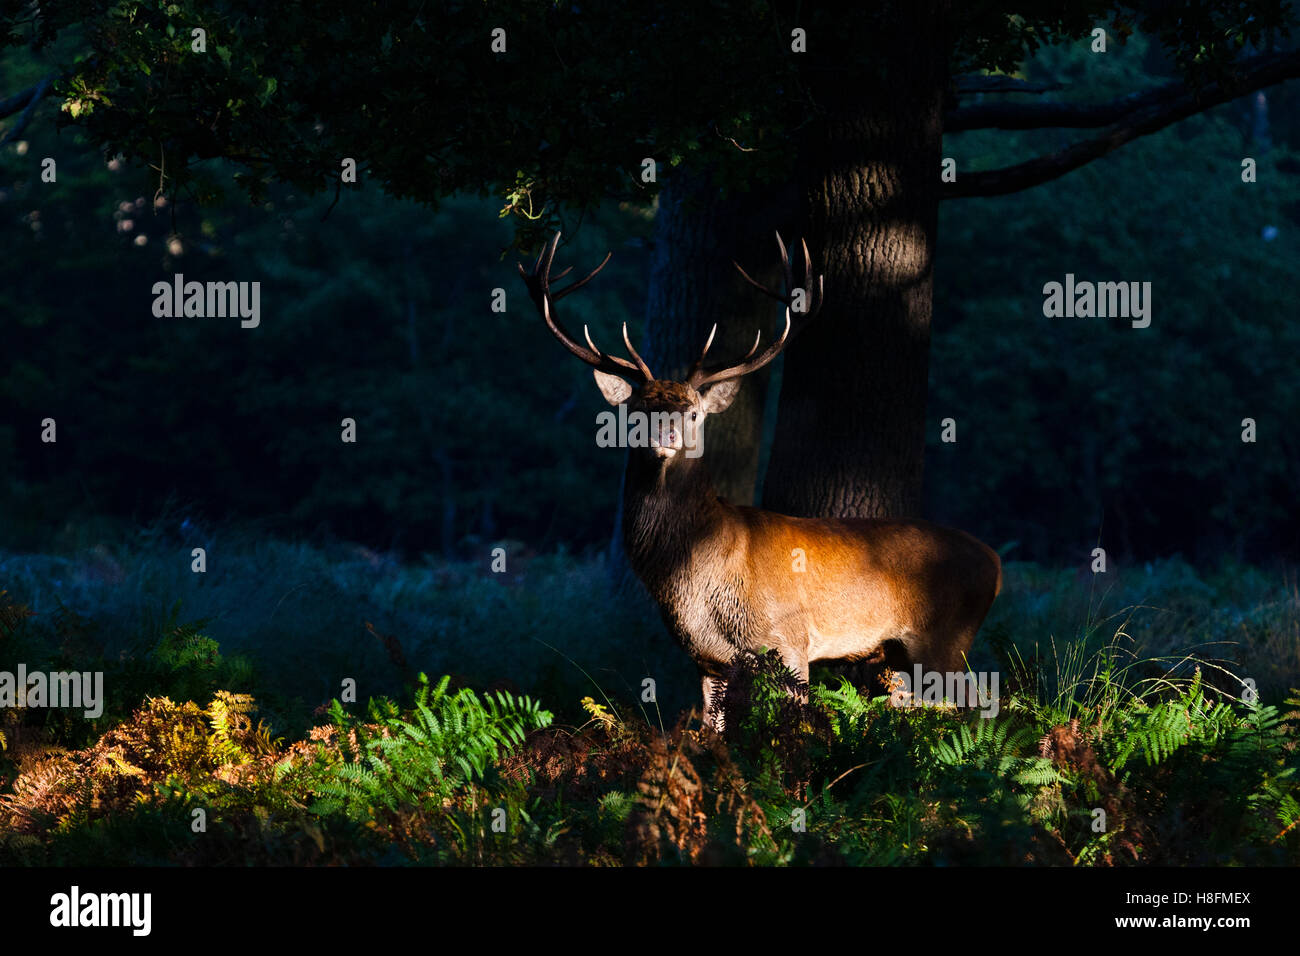 Richmond, London, UK. Large stag red deer in dappled sunlight early morning. Stock Photo